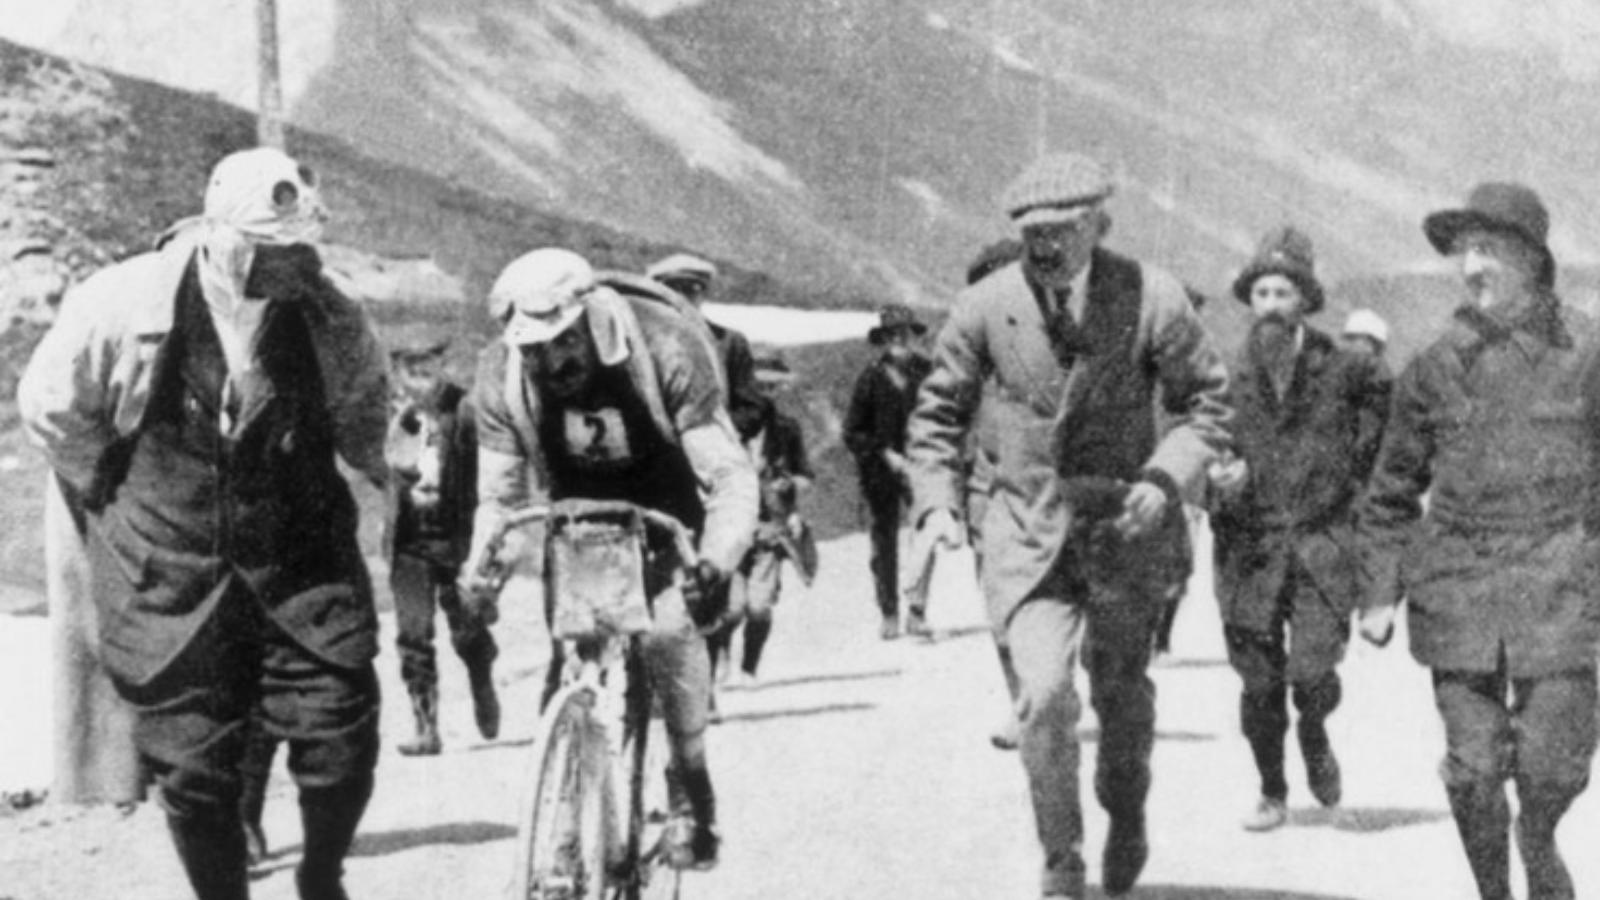 For the first time in Tour de France history Col du Galibier is climbed in the 5th stage at Tour de France 1911